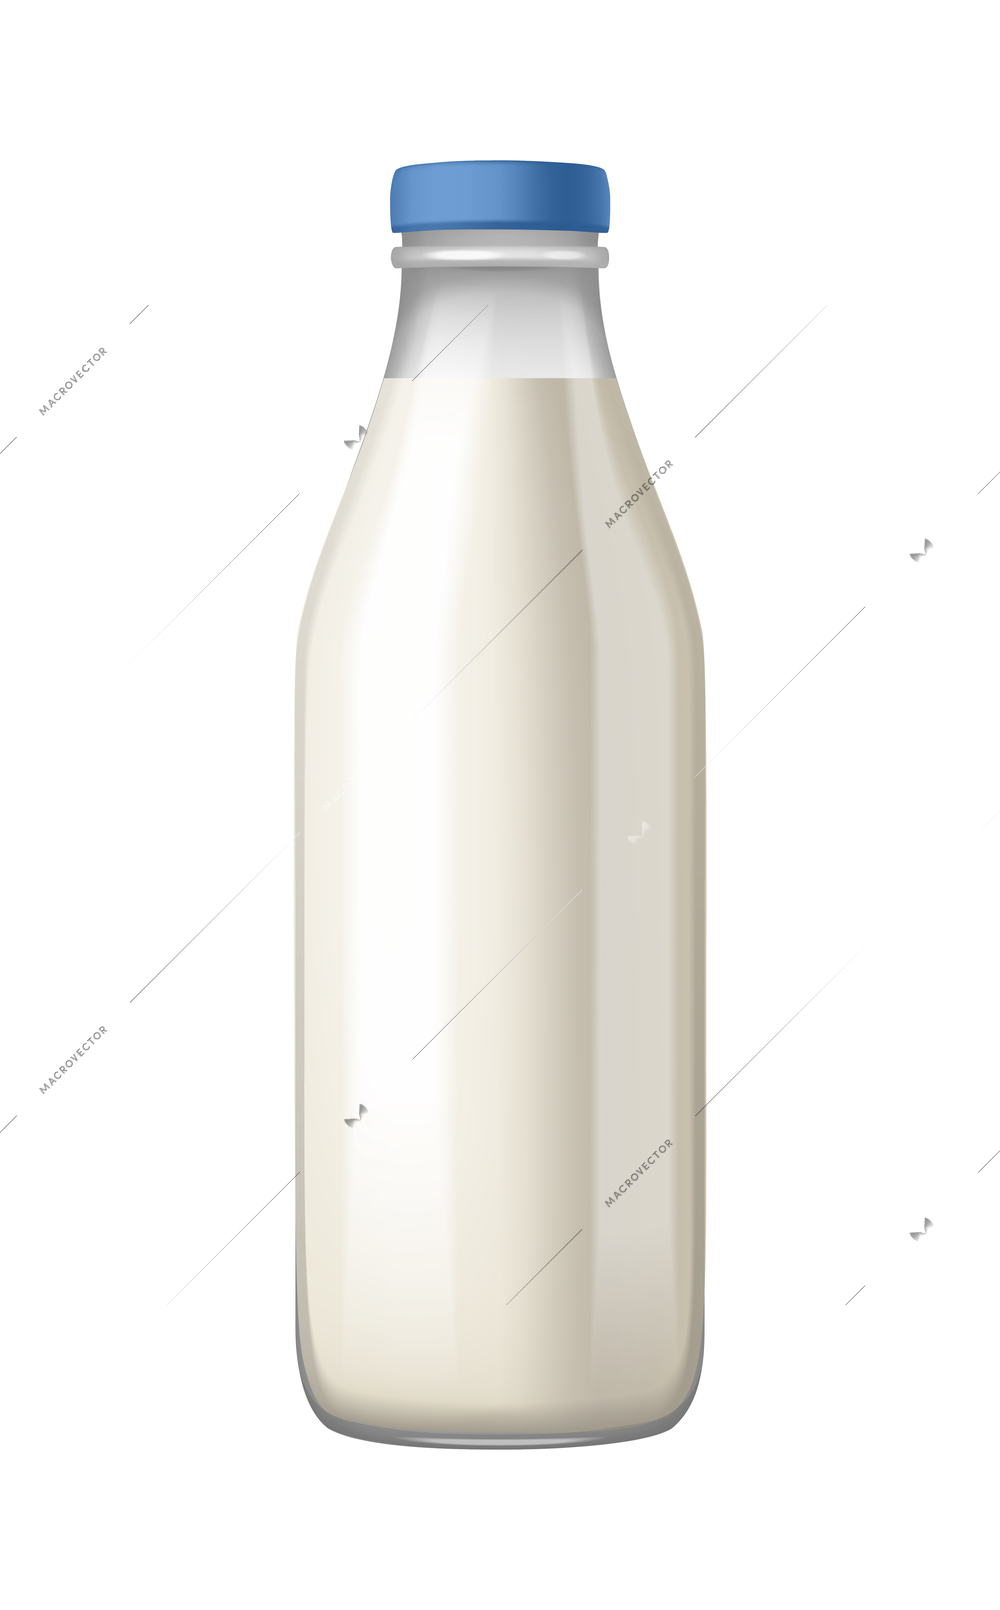 Realistic glass bottle of milk with blue cap vector illustration